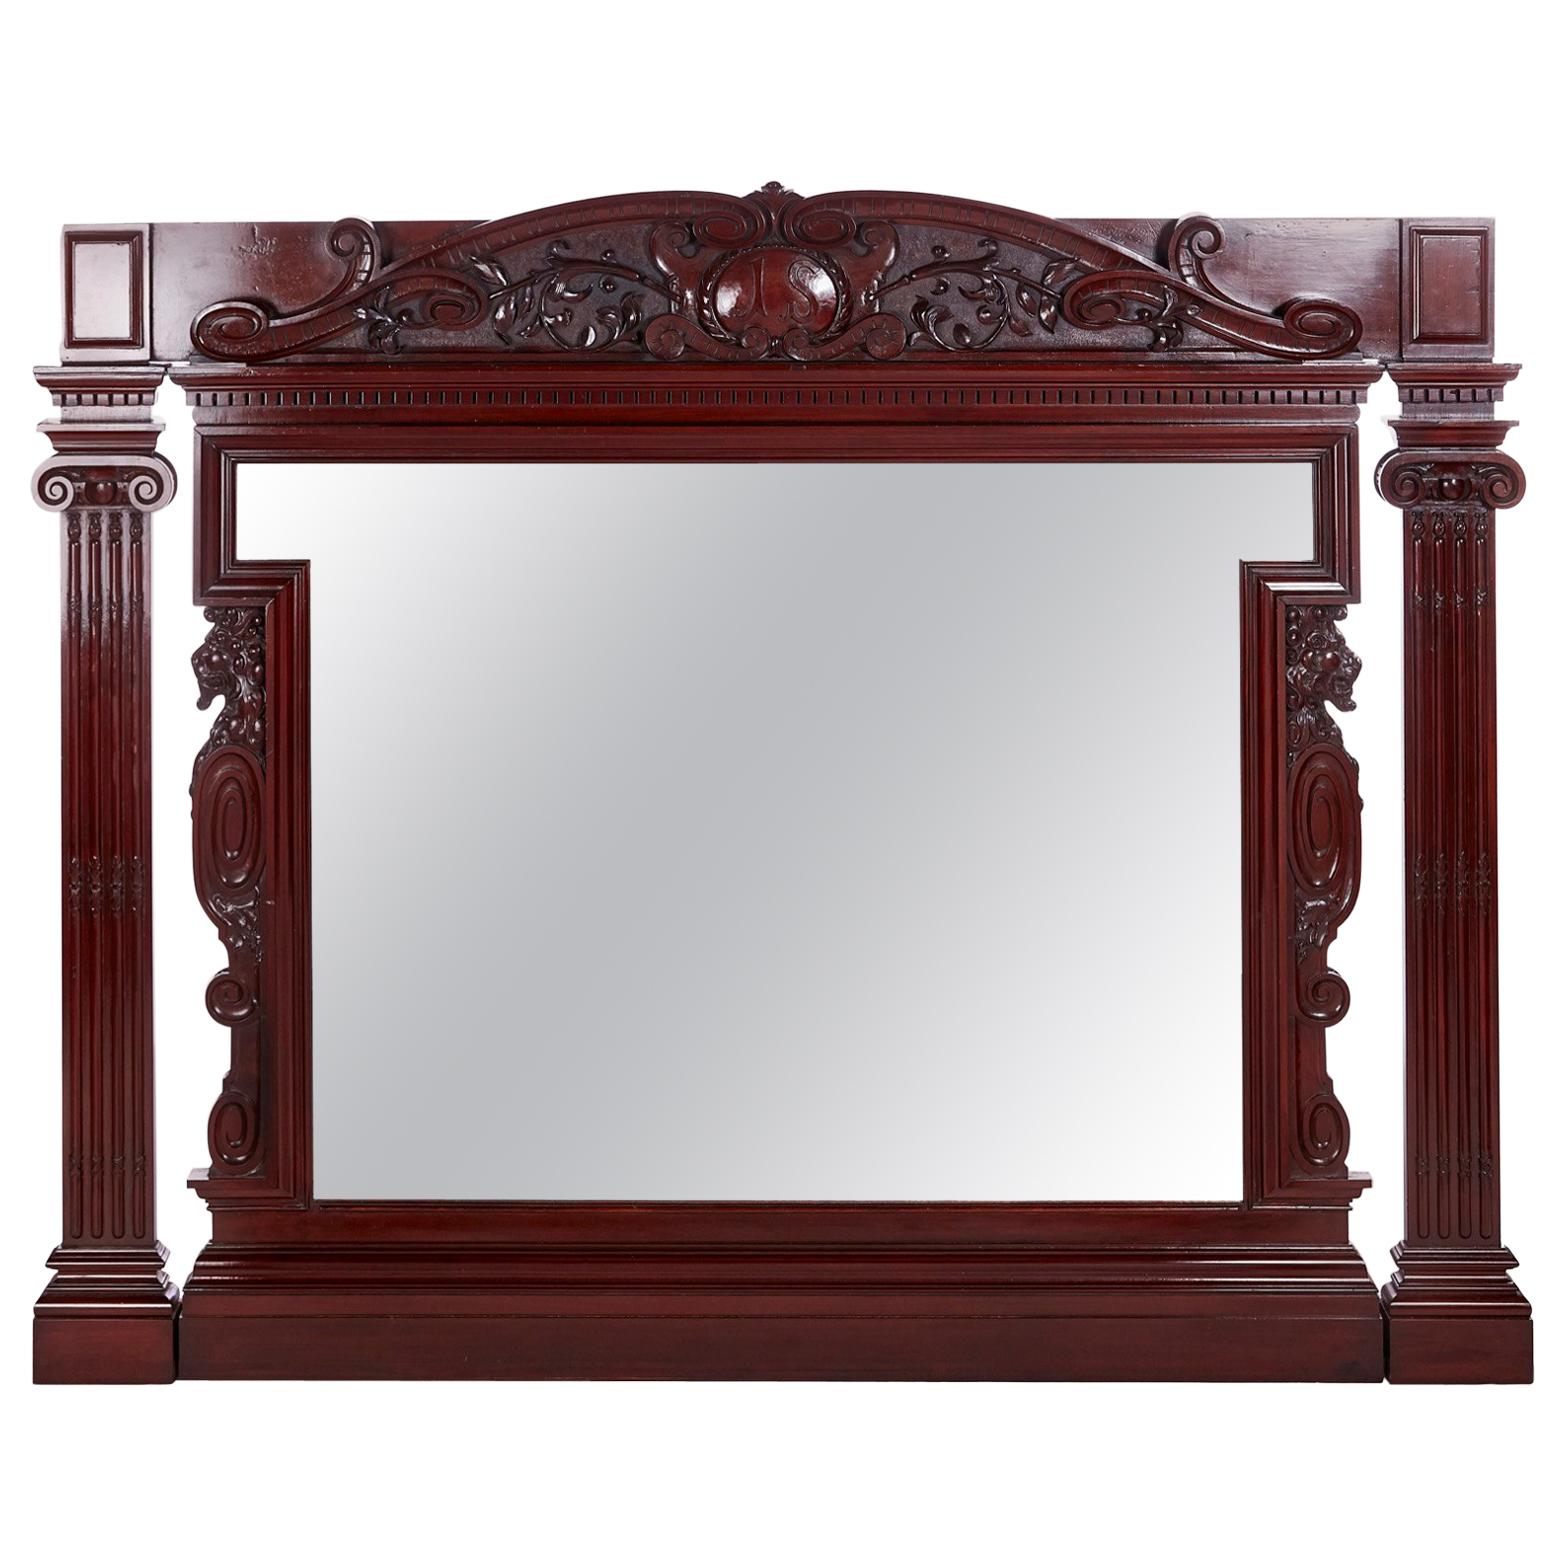 Fantastic Quality Antique Victorian Mahogany Large Carved Wall Mirror For Sale